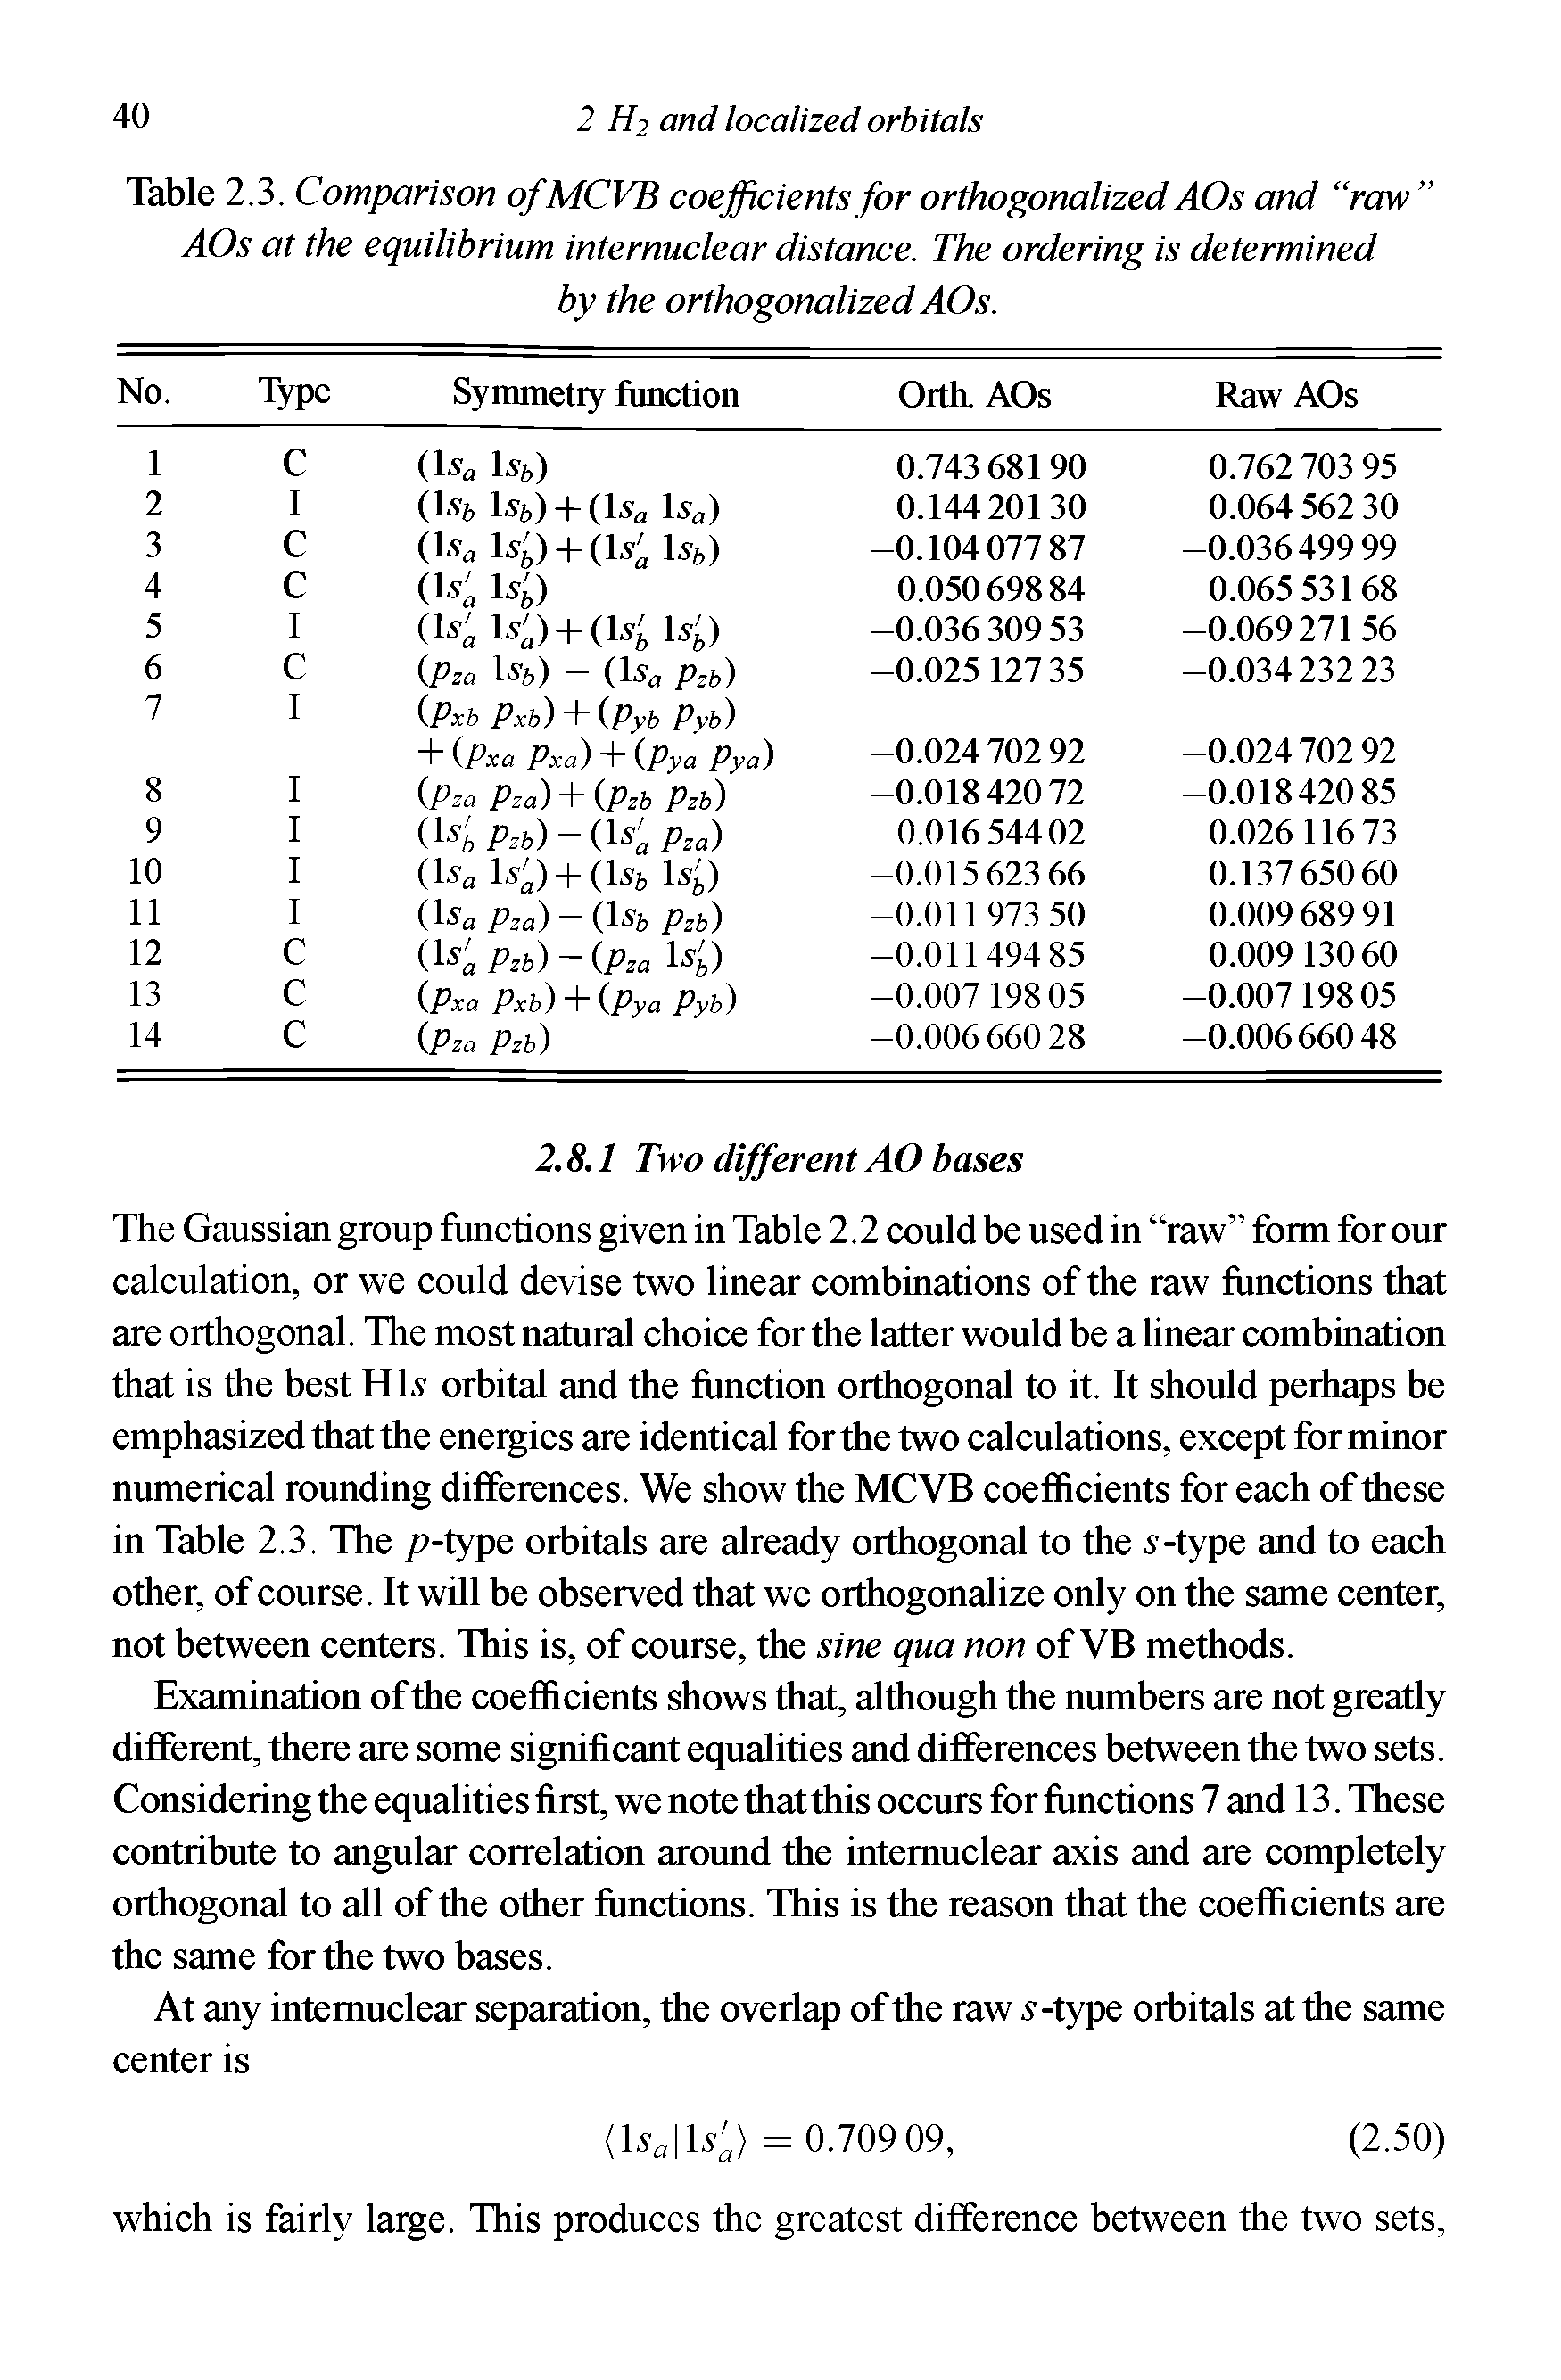 Table 2.3. Comparison ofMCVB coefficients for orthogonalized AOs and raw AOs at the equilibrium internuclear distance. The ordering is determined by the orthogonalized AOs.